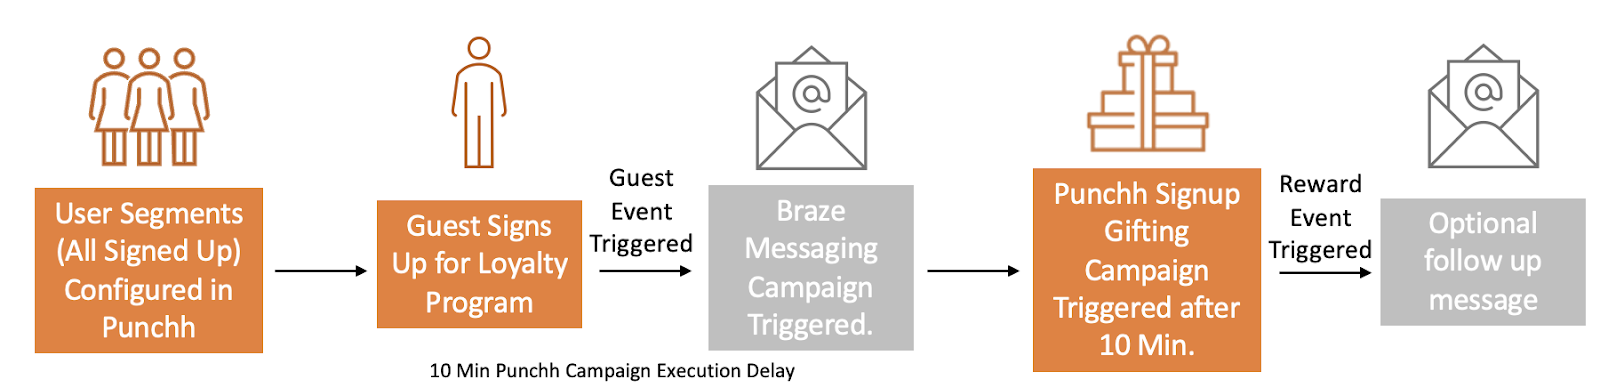 A user segment is configured in punch, and guests sign up for a loyalty program. After this, the guest event, if triggered, and the Braze messaging campaign is triggered. Next, the Punchh sign-up gifting campaign is triggered after 10 minutes, triggering the reward event and optional follow-up message.